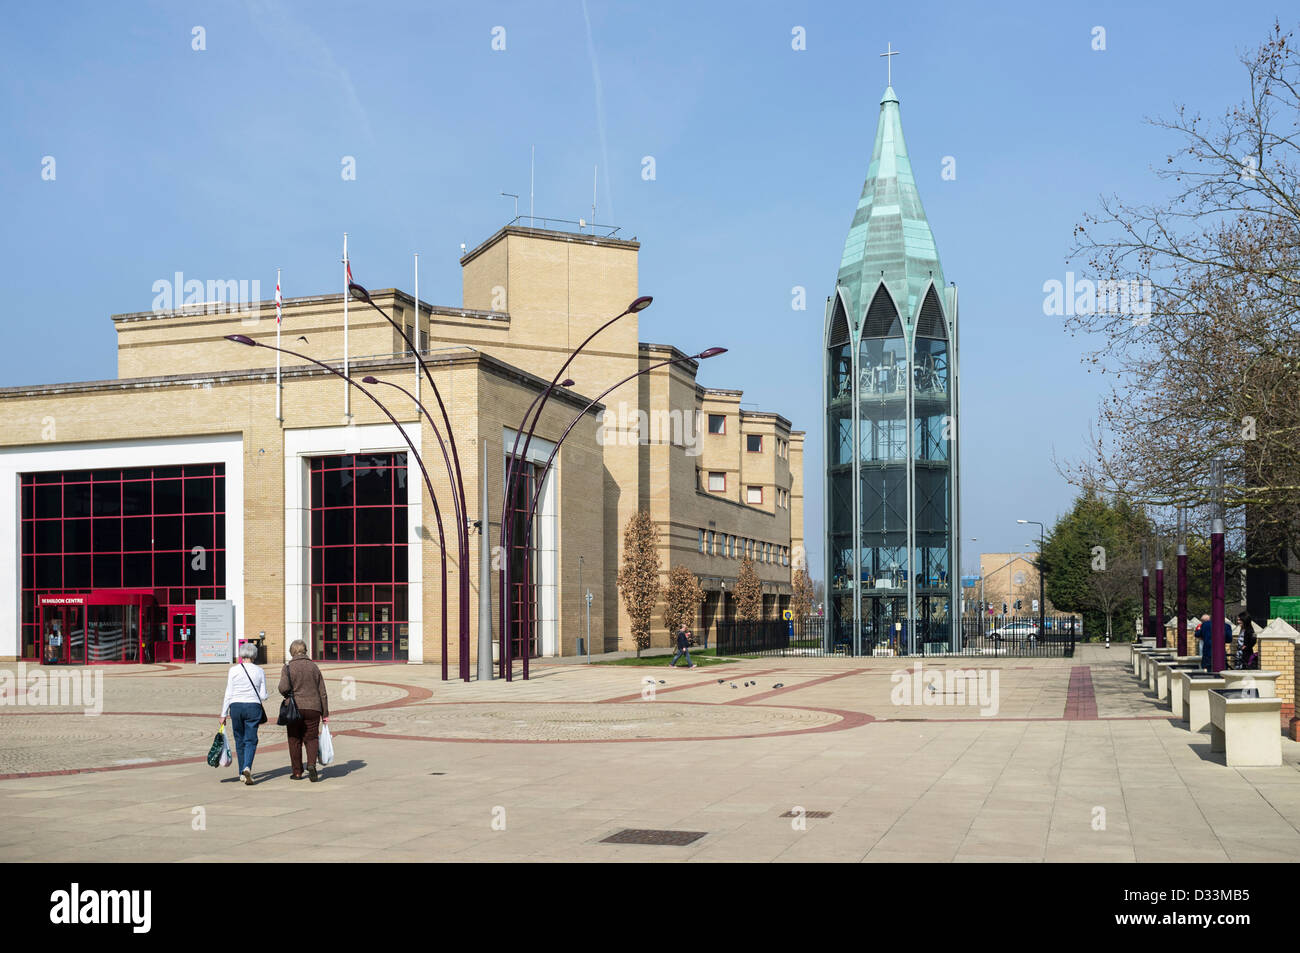 Basildon town centre, Essex, UK - with St Martin's bell tower Stock Photo